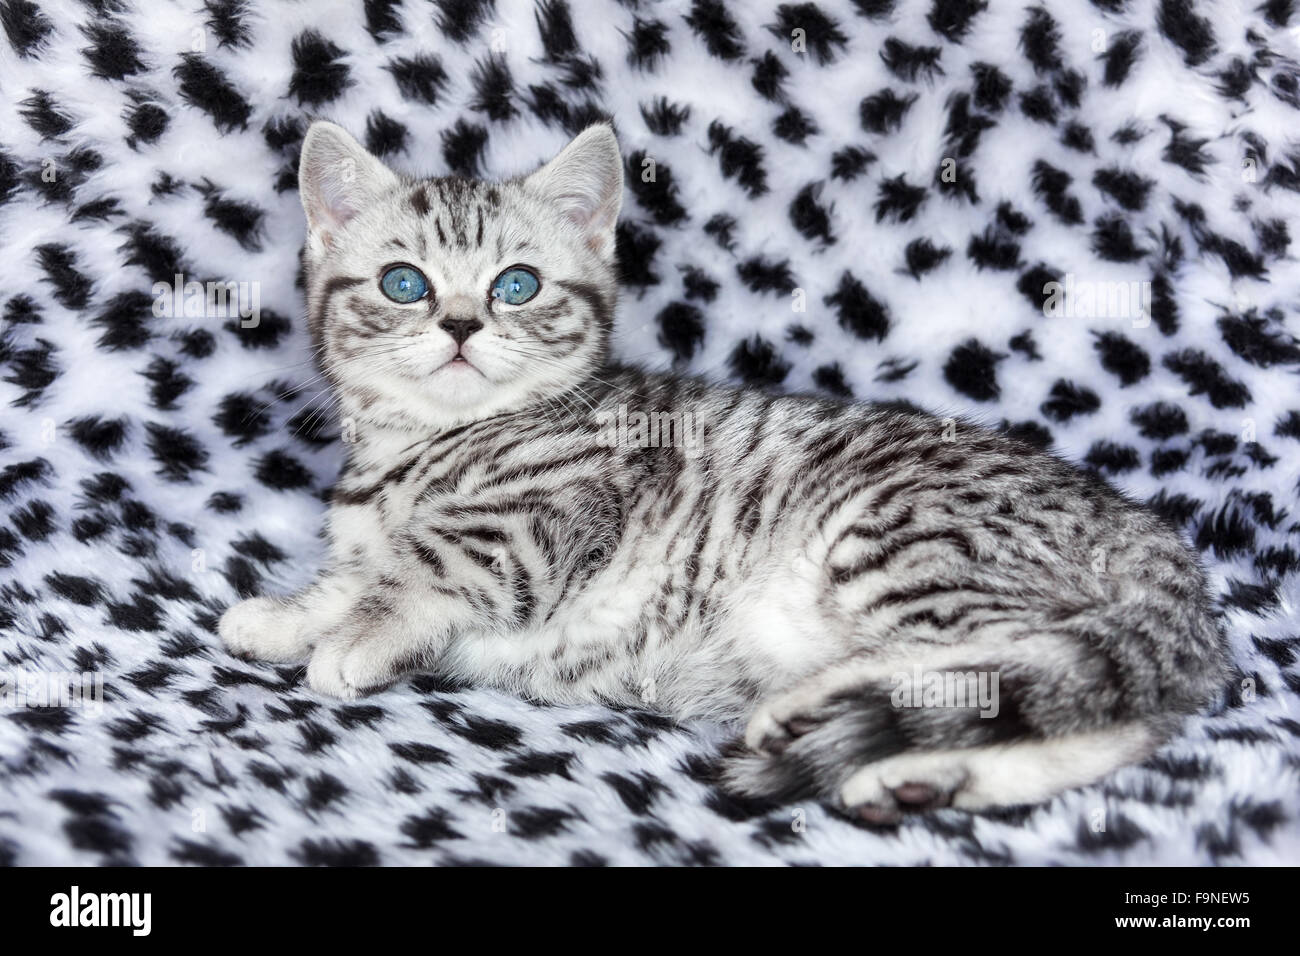 Young black silver tabby spotted cat  lying on black and white fur Stock Photo